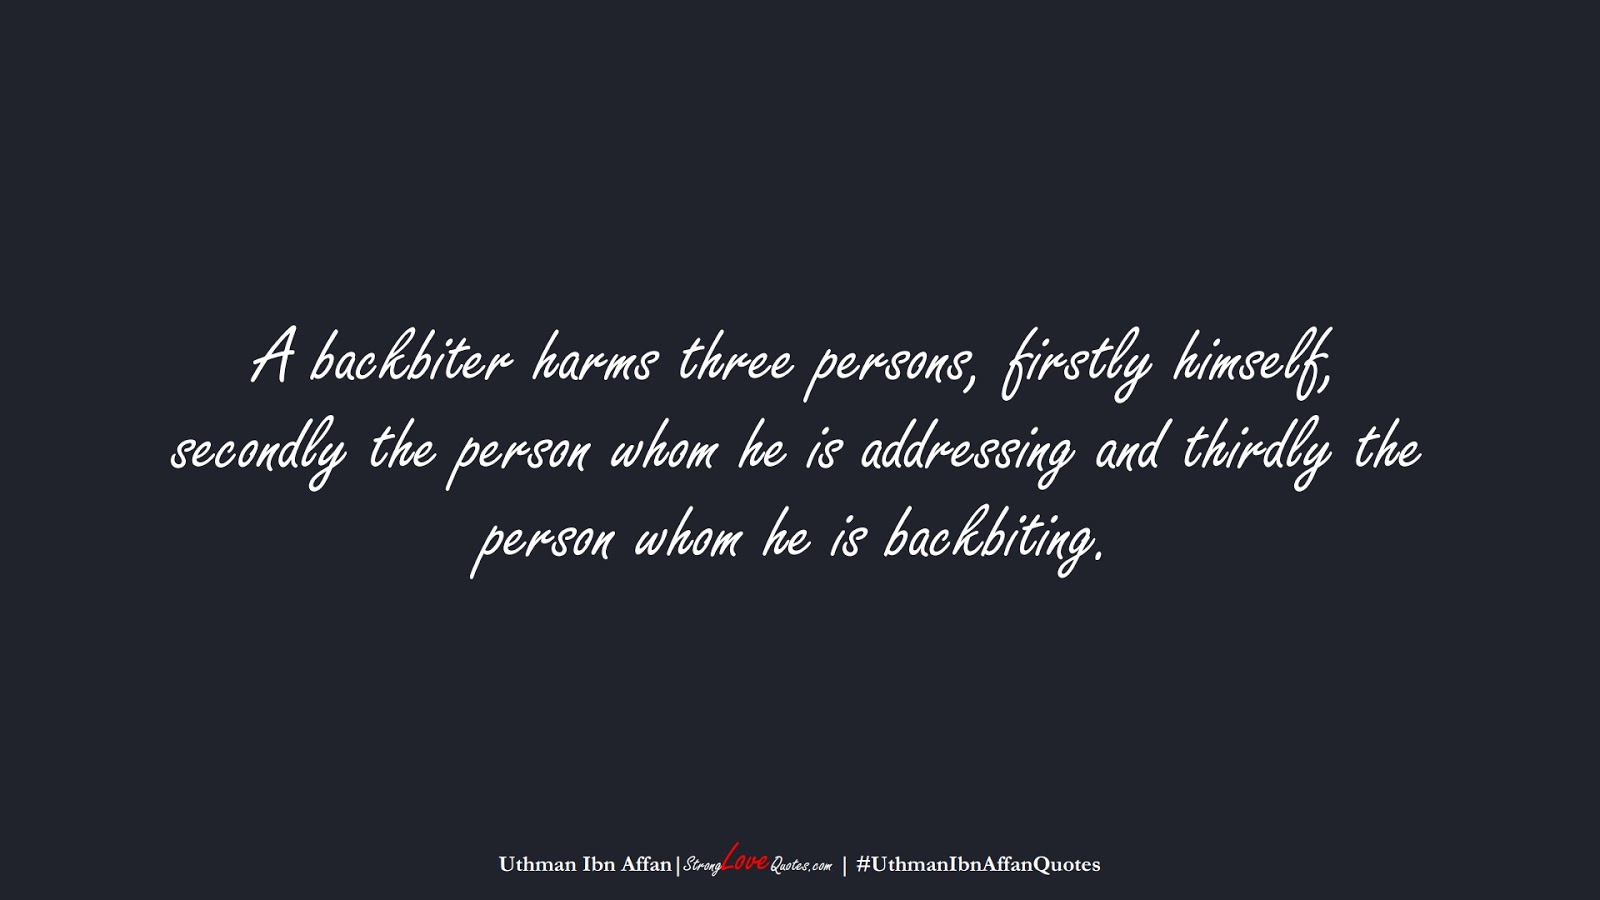 A backbiter harms three persons, firstly himself, secondly the person whom he is addressing and thirdly the person whom he is backbiting. (Uthman Ibn Affan);  #UthmanIbnAffanQuotes